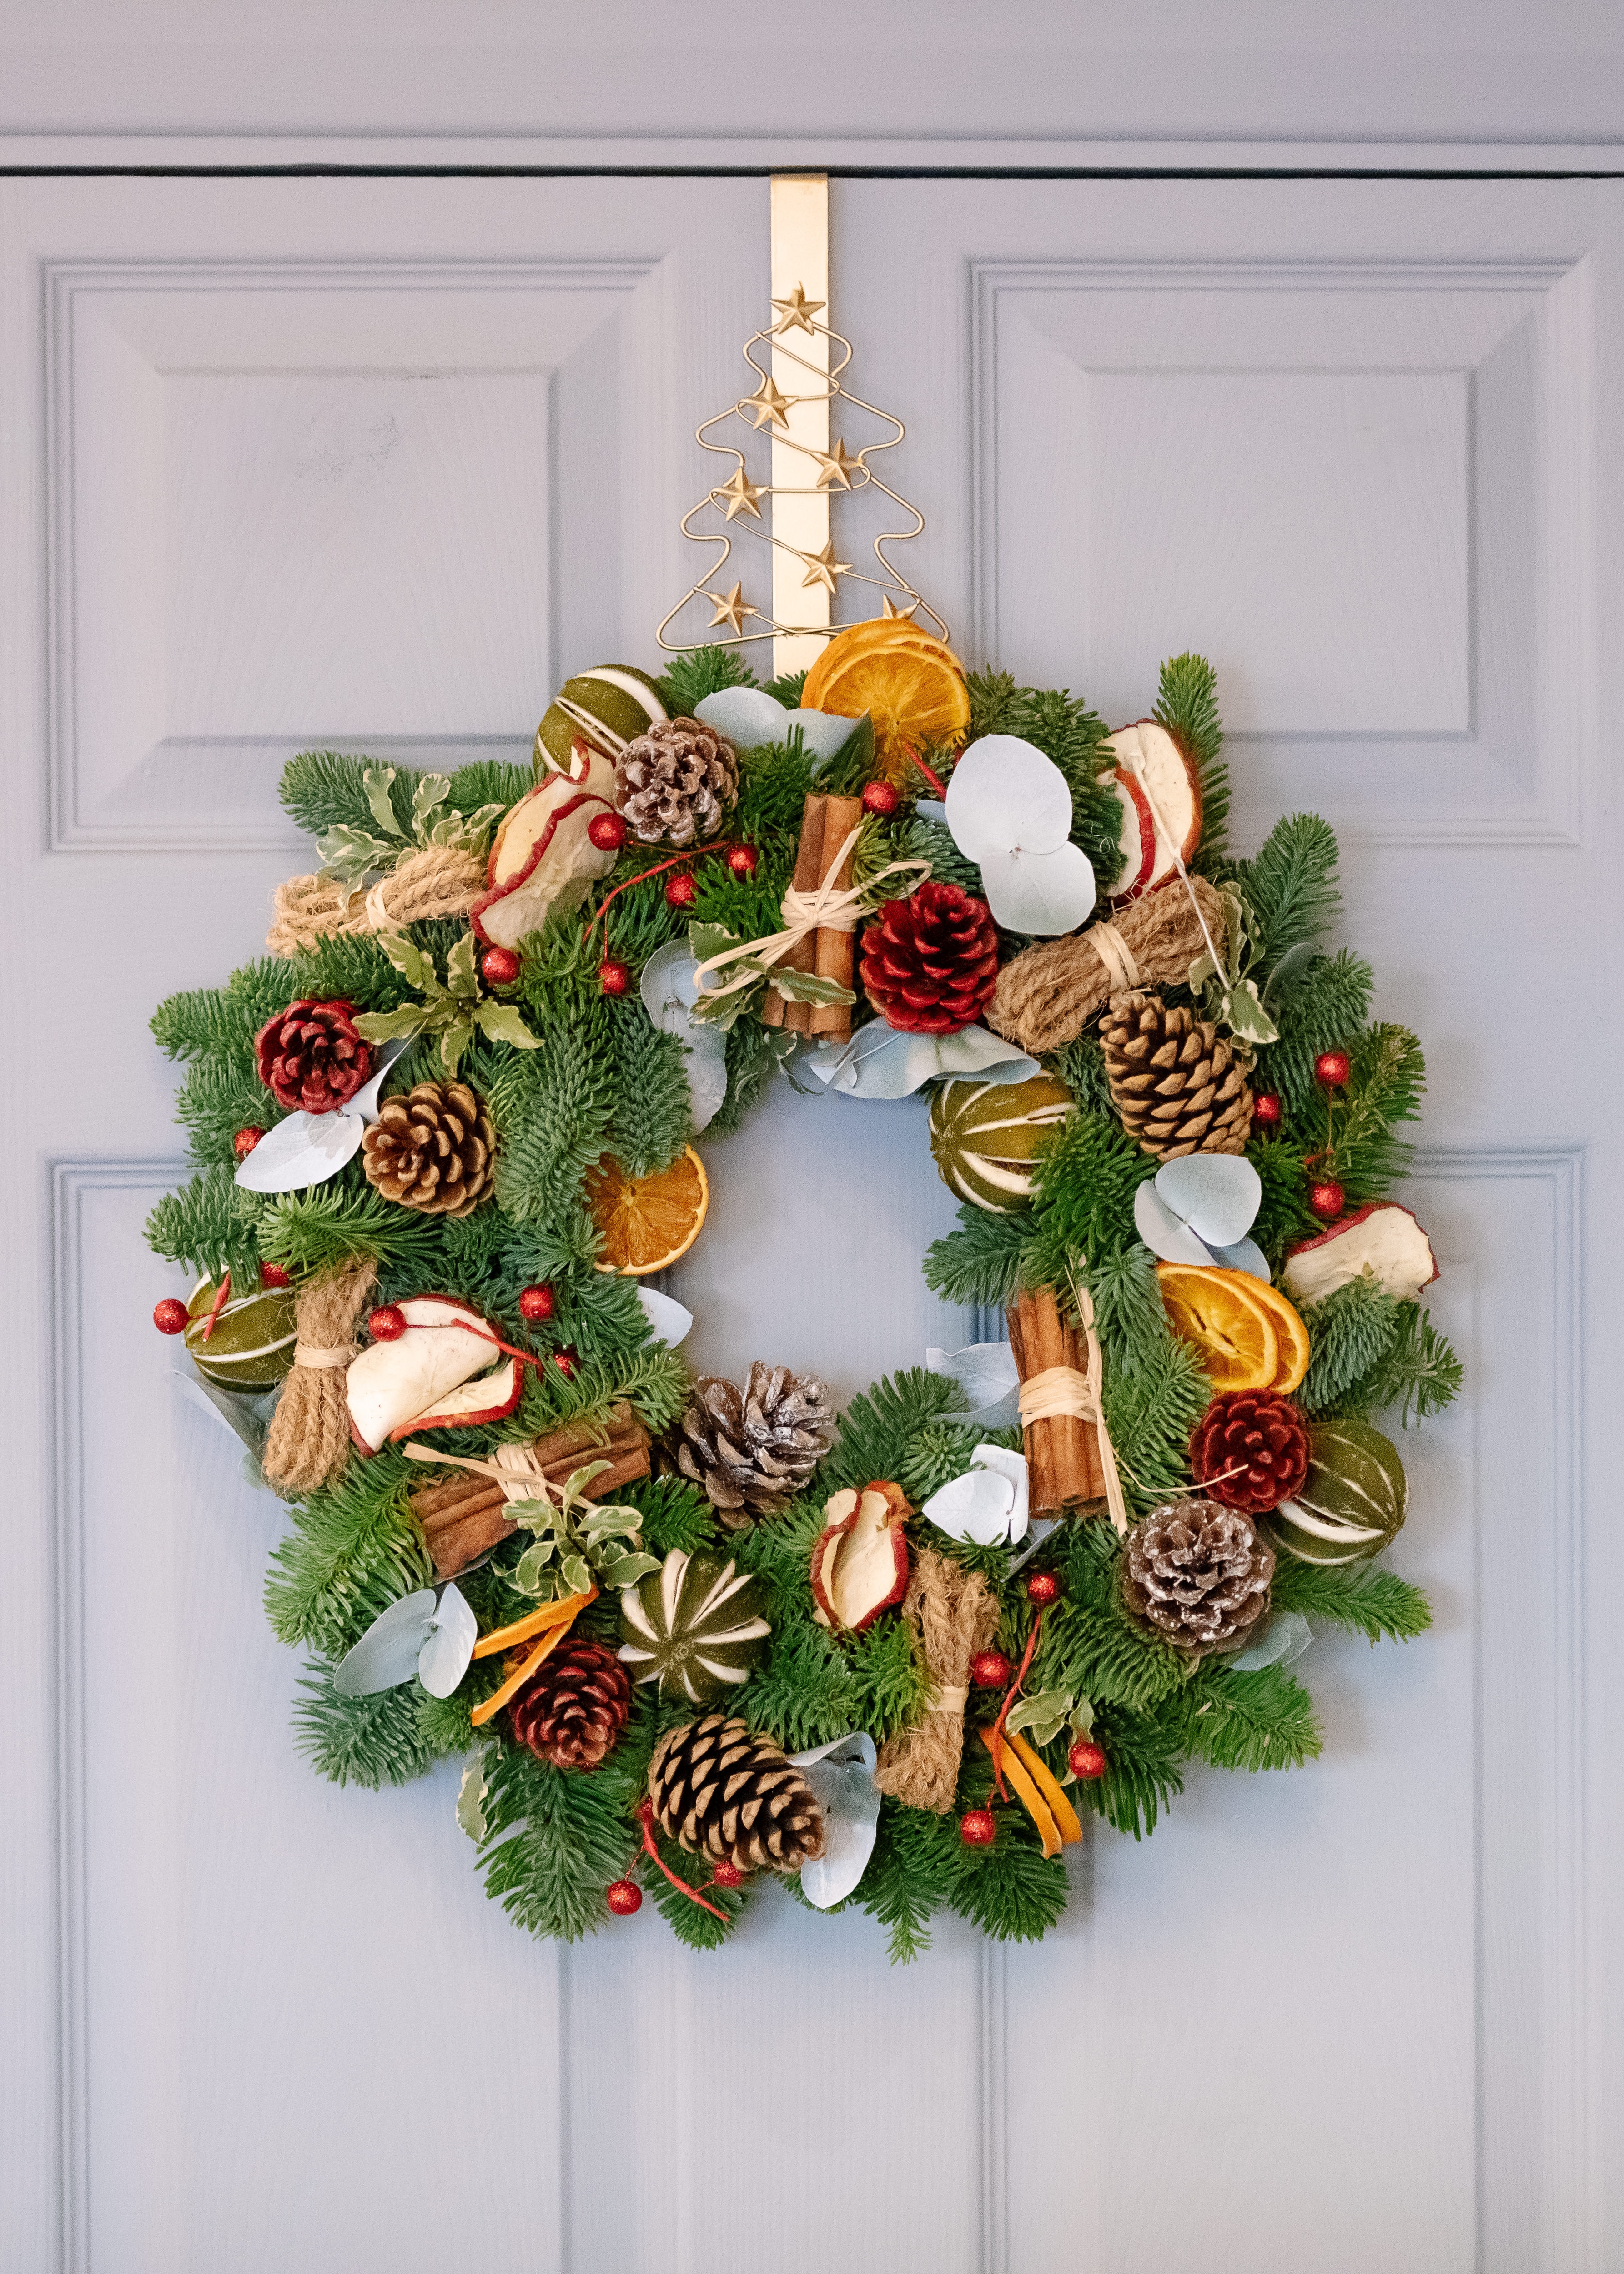 holiday wreath by corina andrisca on unsplash